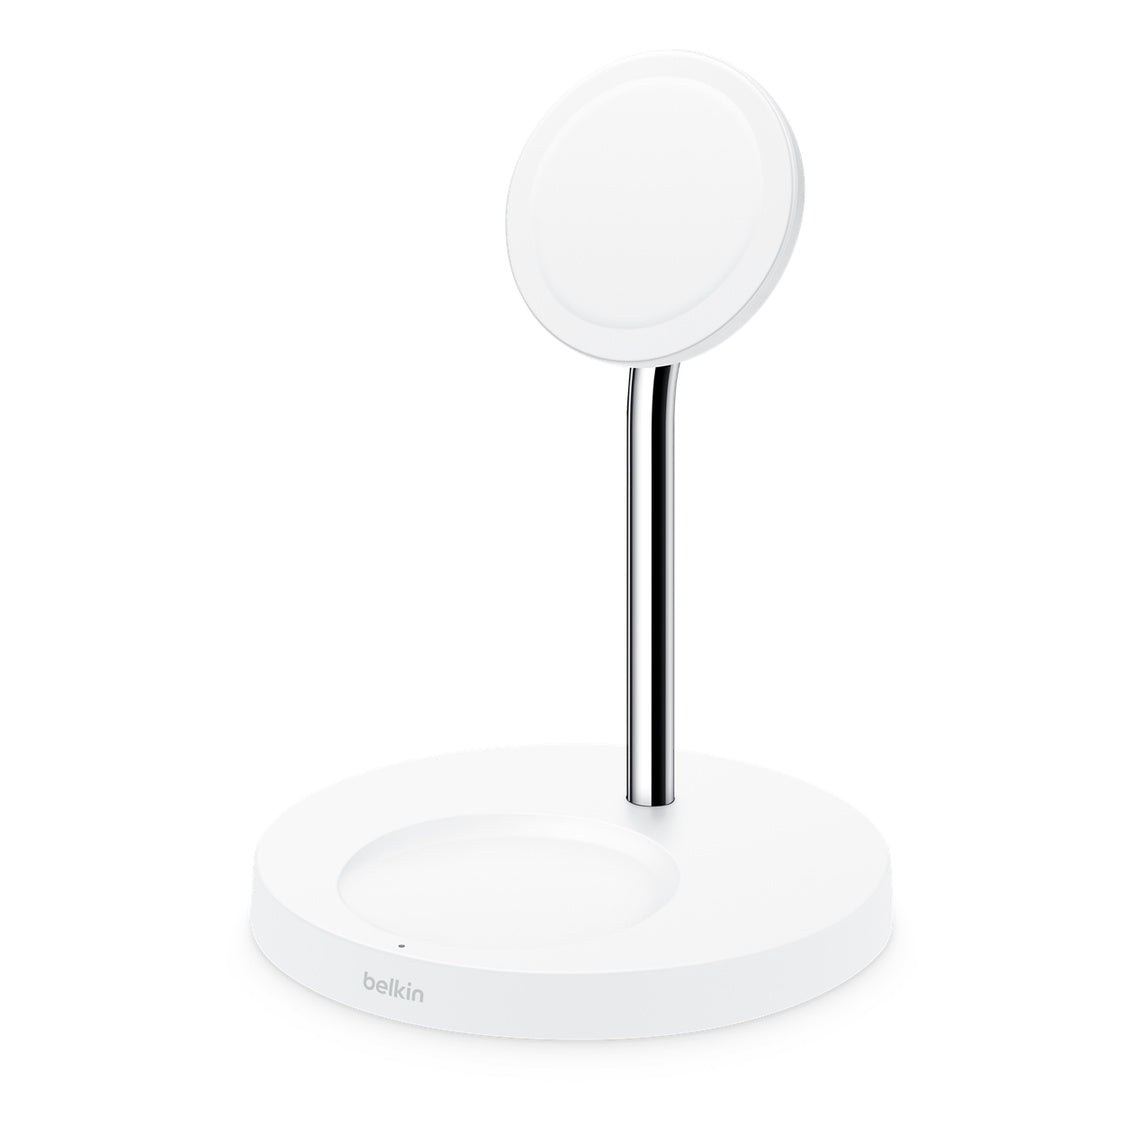 Belkin 3-in-1 Wireless Charger with MagSafe Charging 15W, Black